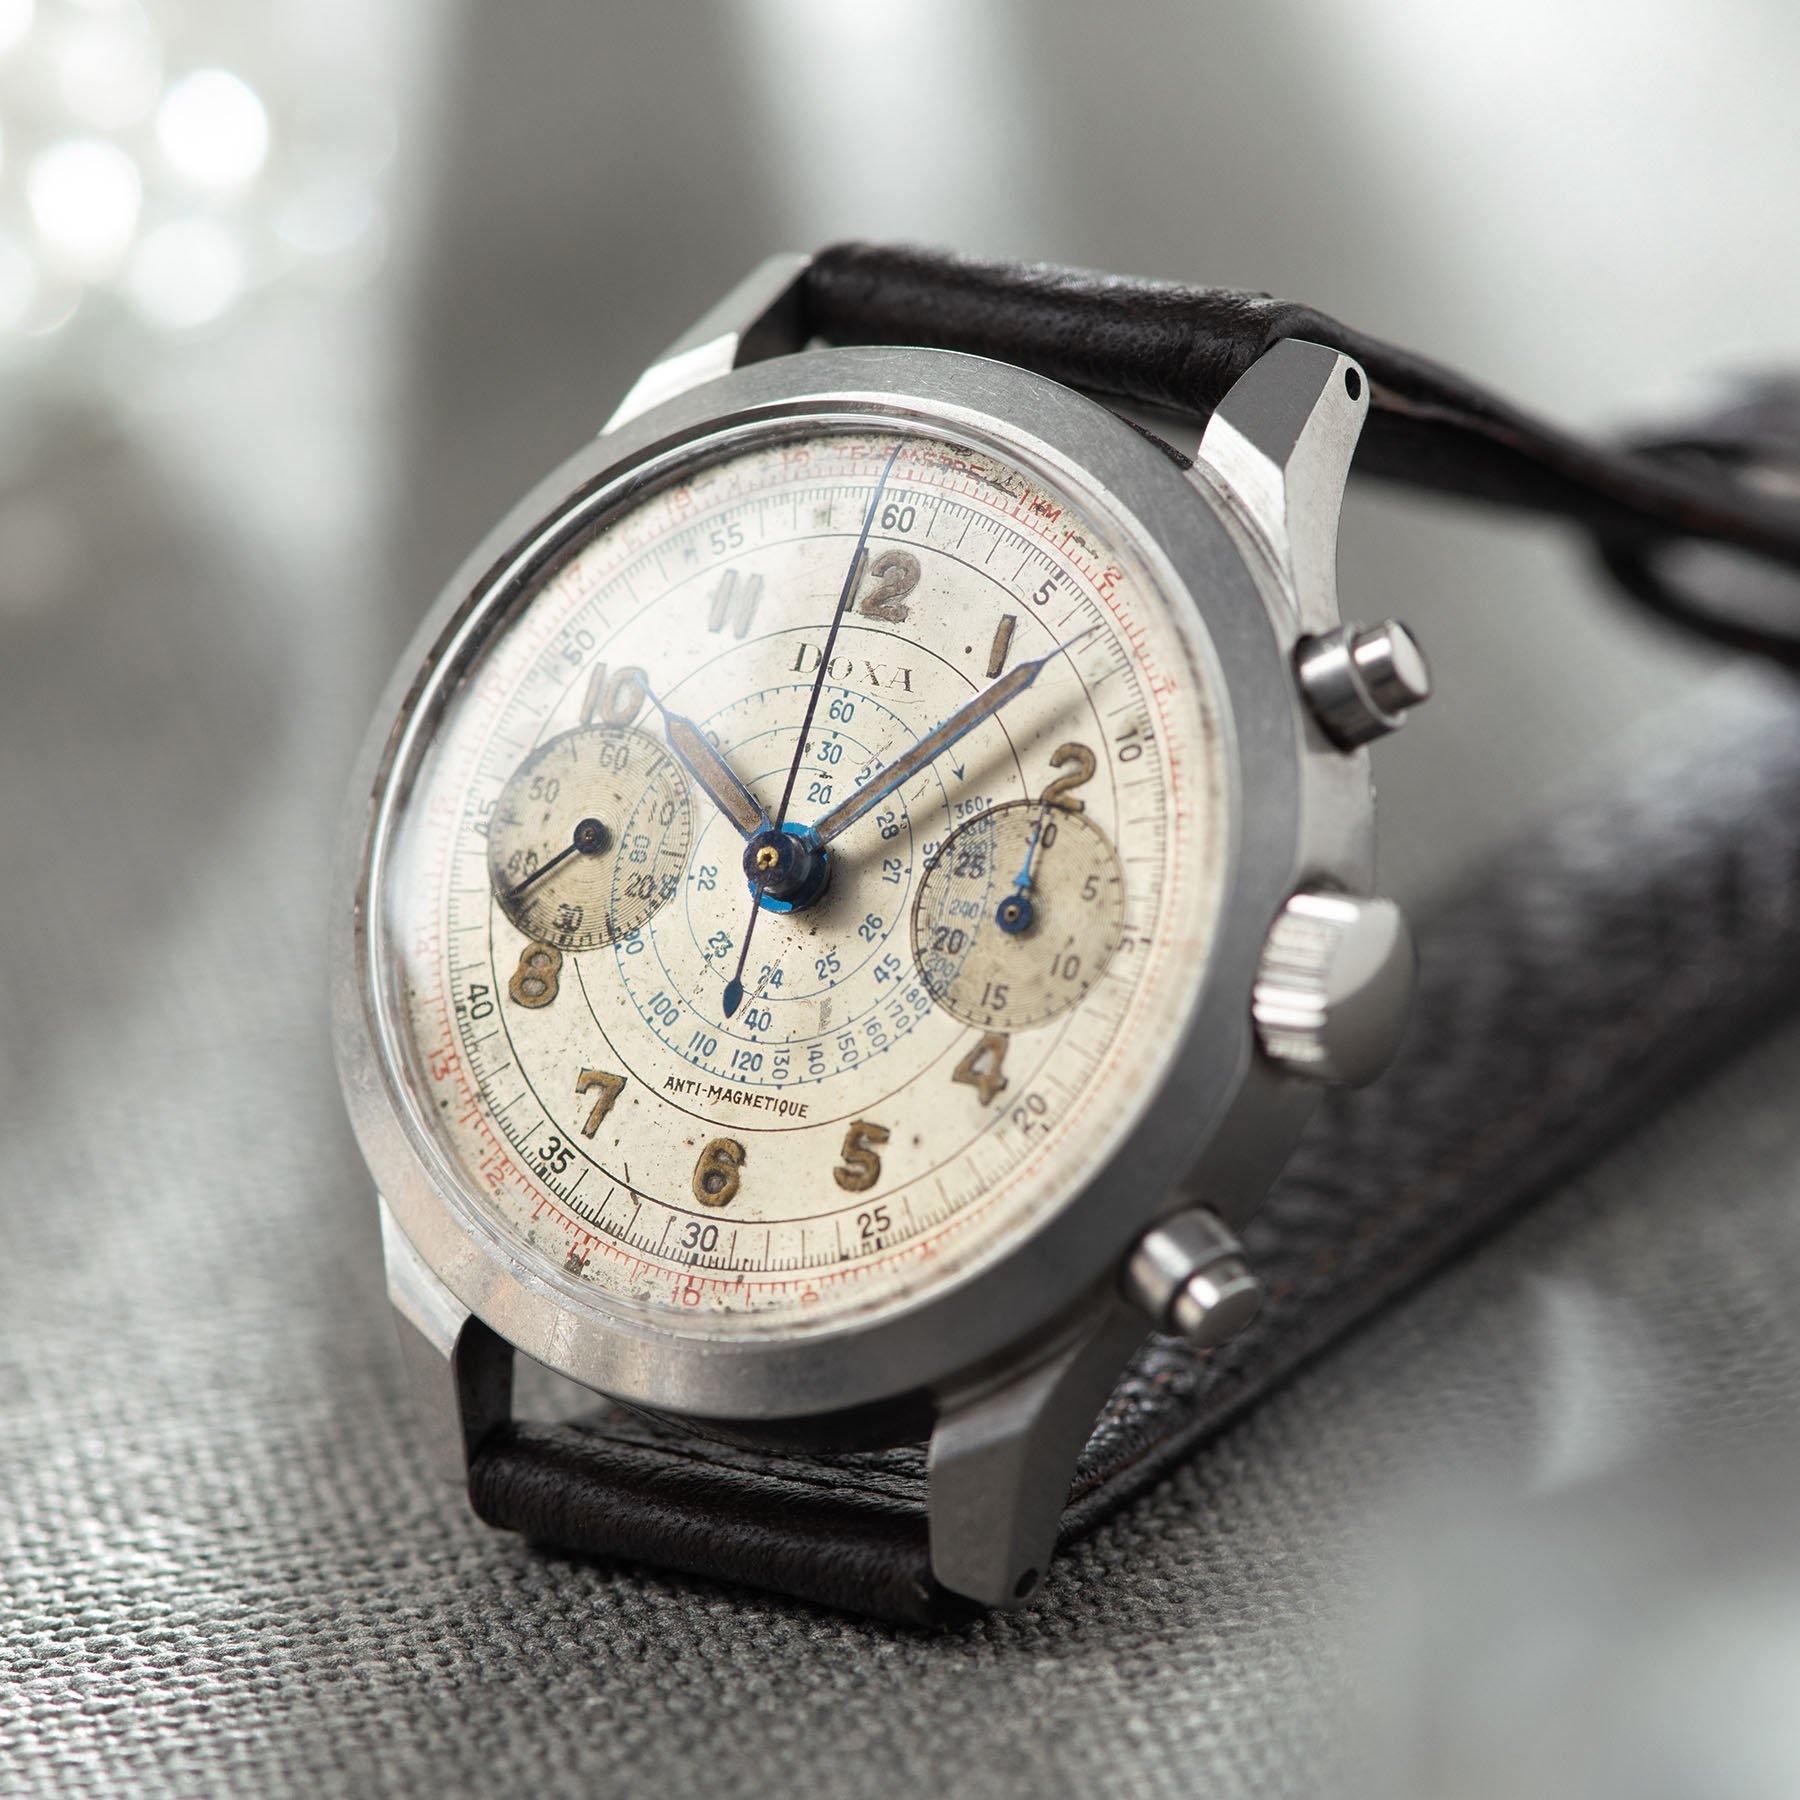 Doxa Multi Scale Steel Spillman Case Chronograph  Dates to the 1940s 